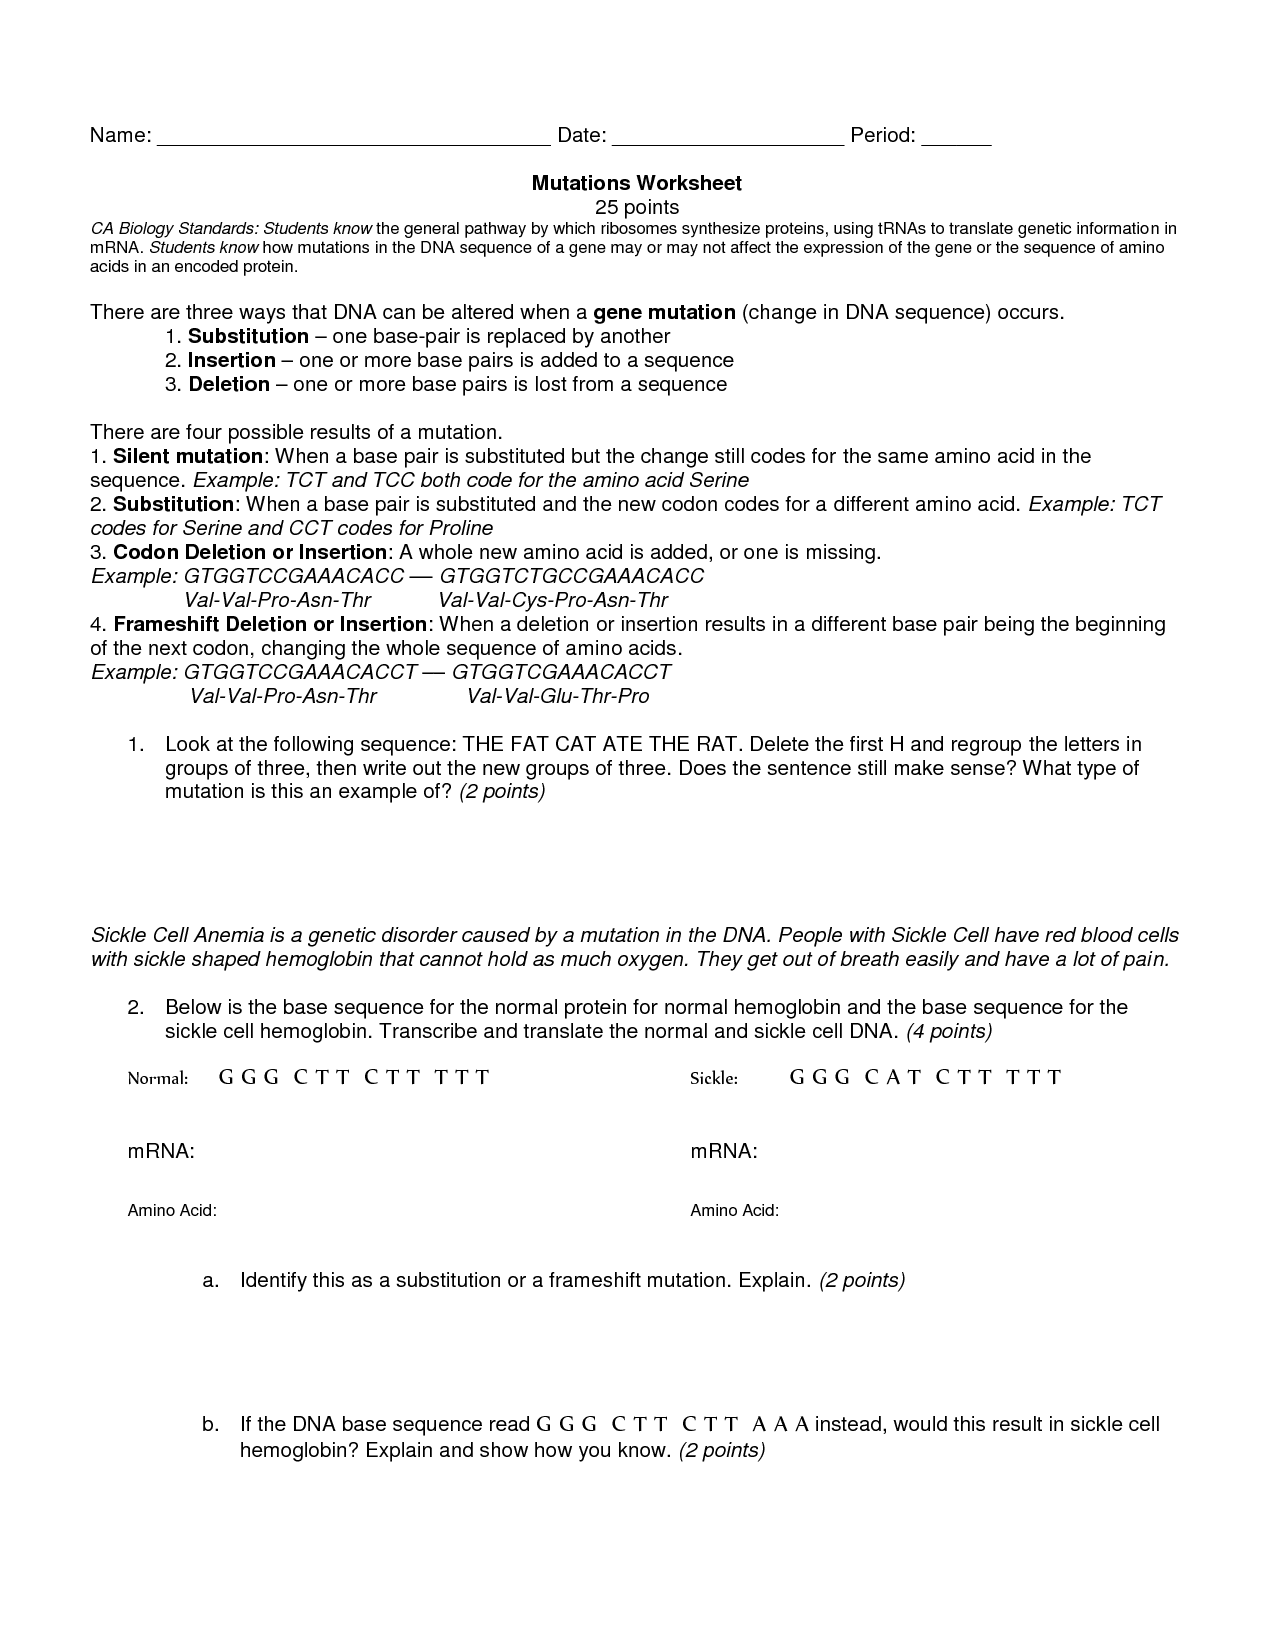 dna-mutations-practice-worksheet-point-mutation-mutation-worksheet-template-tips-and-reviews